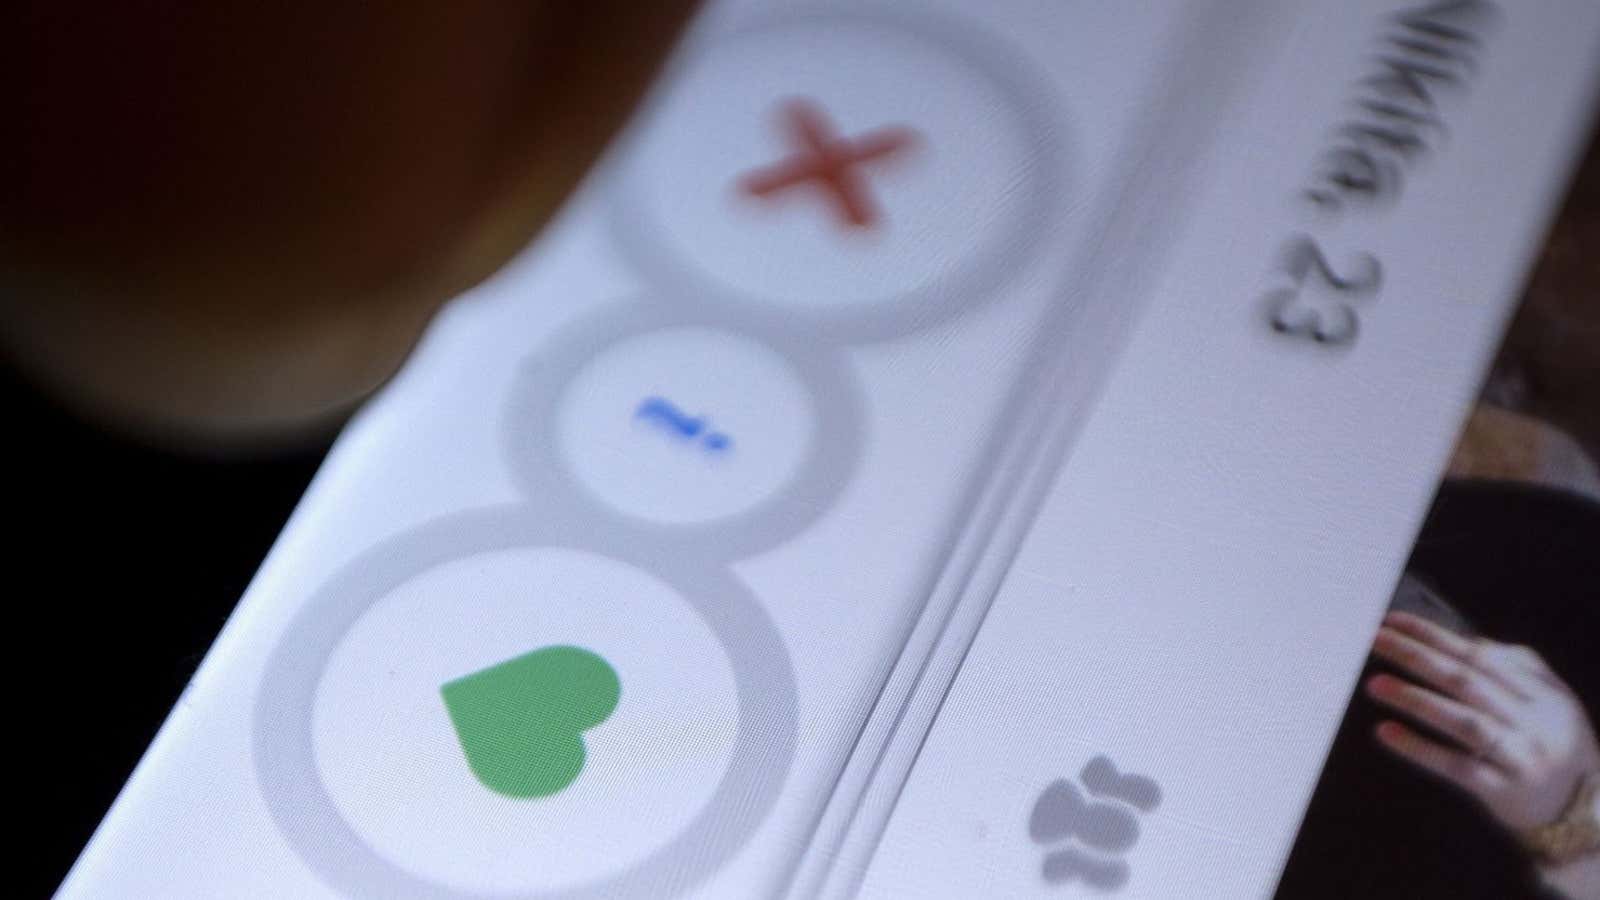 To Swipe or not to Swipe? The Influences of Tinder on Relationships and  Dating